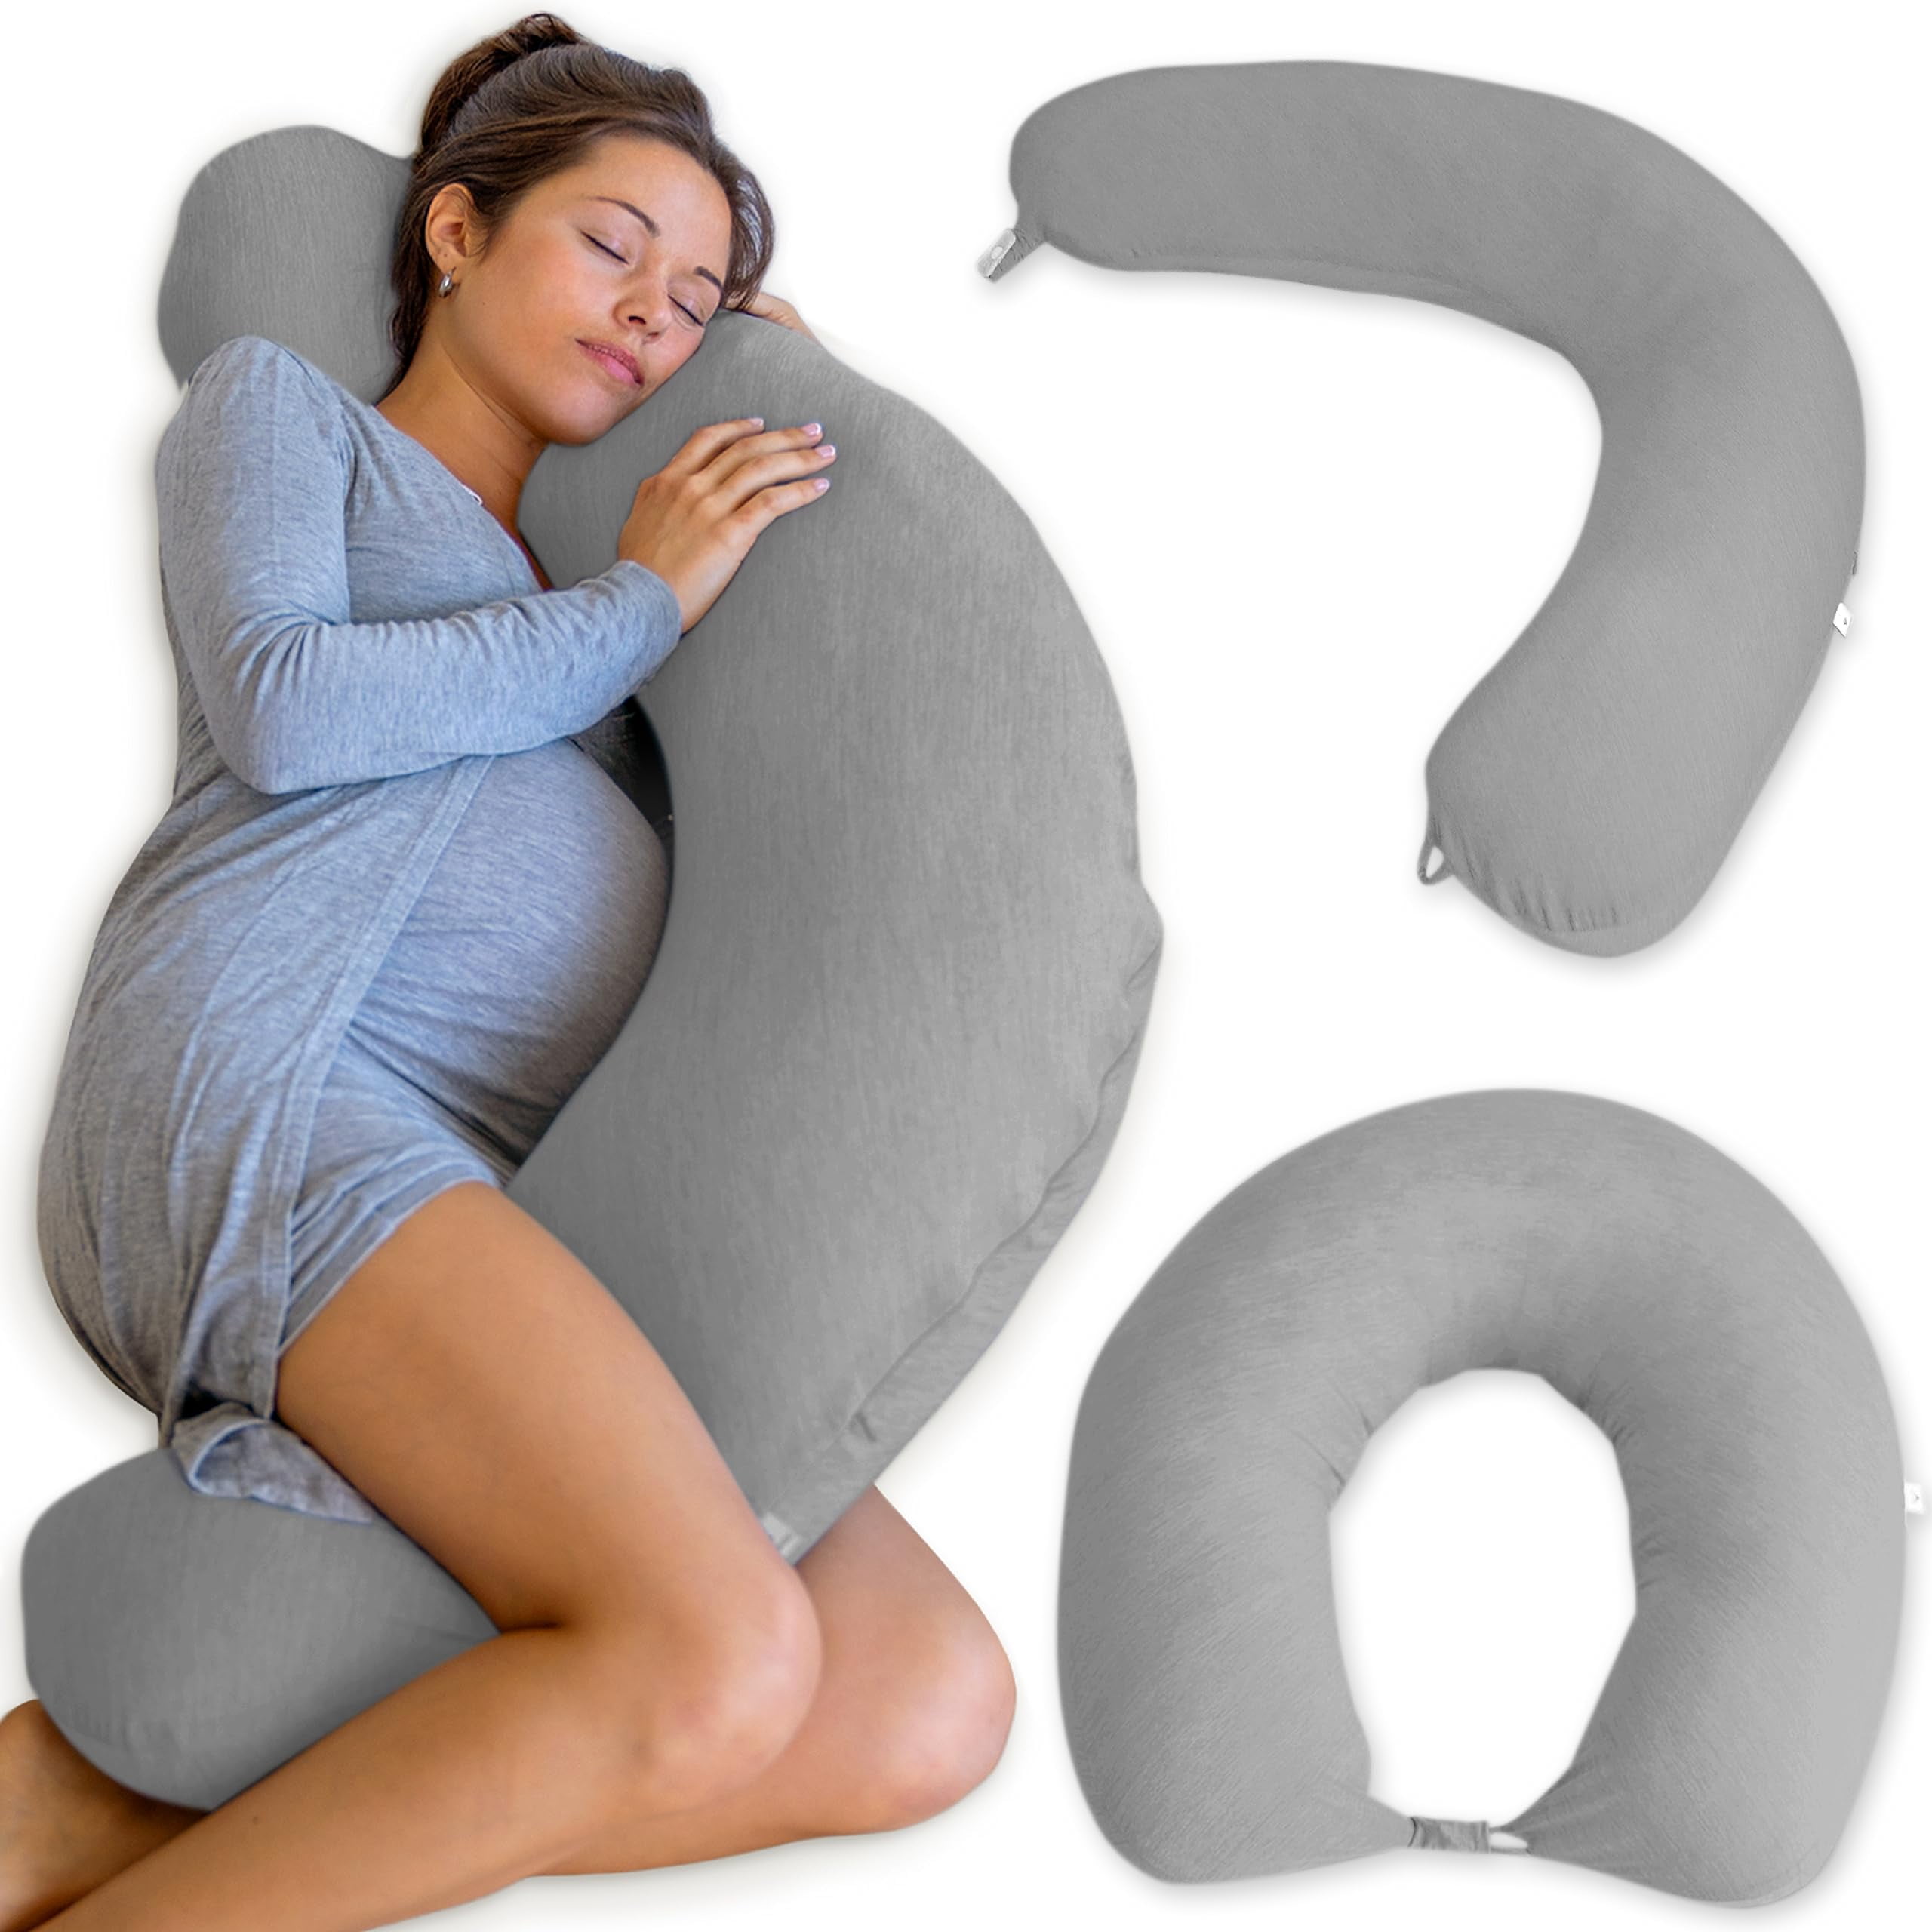 Best Pillow for Side Sleepers 2021: Top Pillows for Neck, Body Support